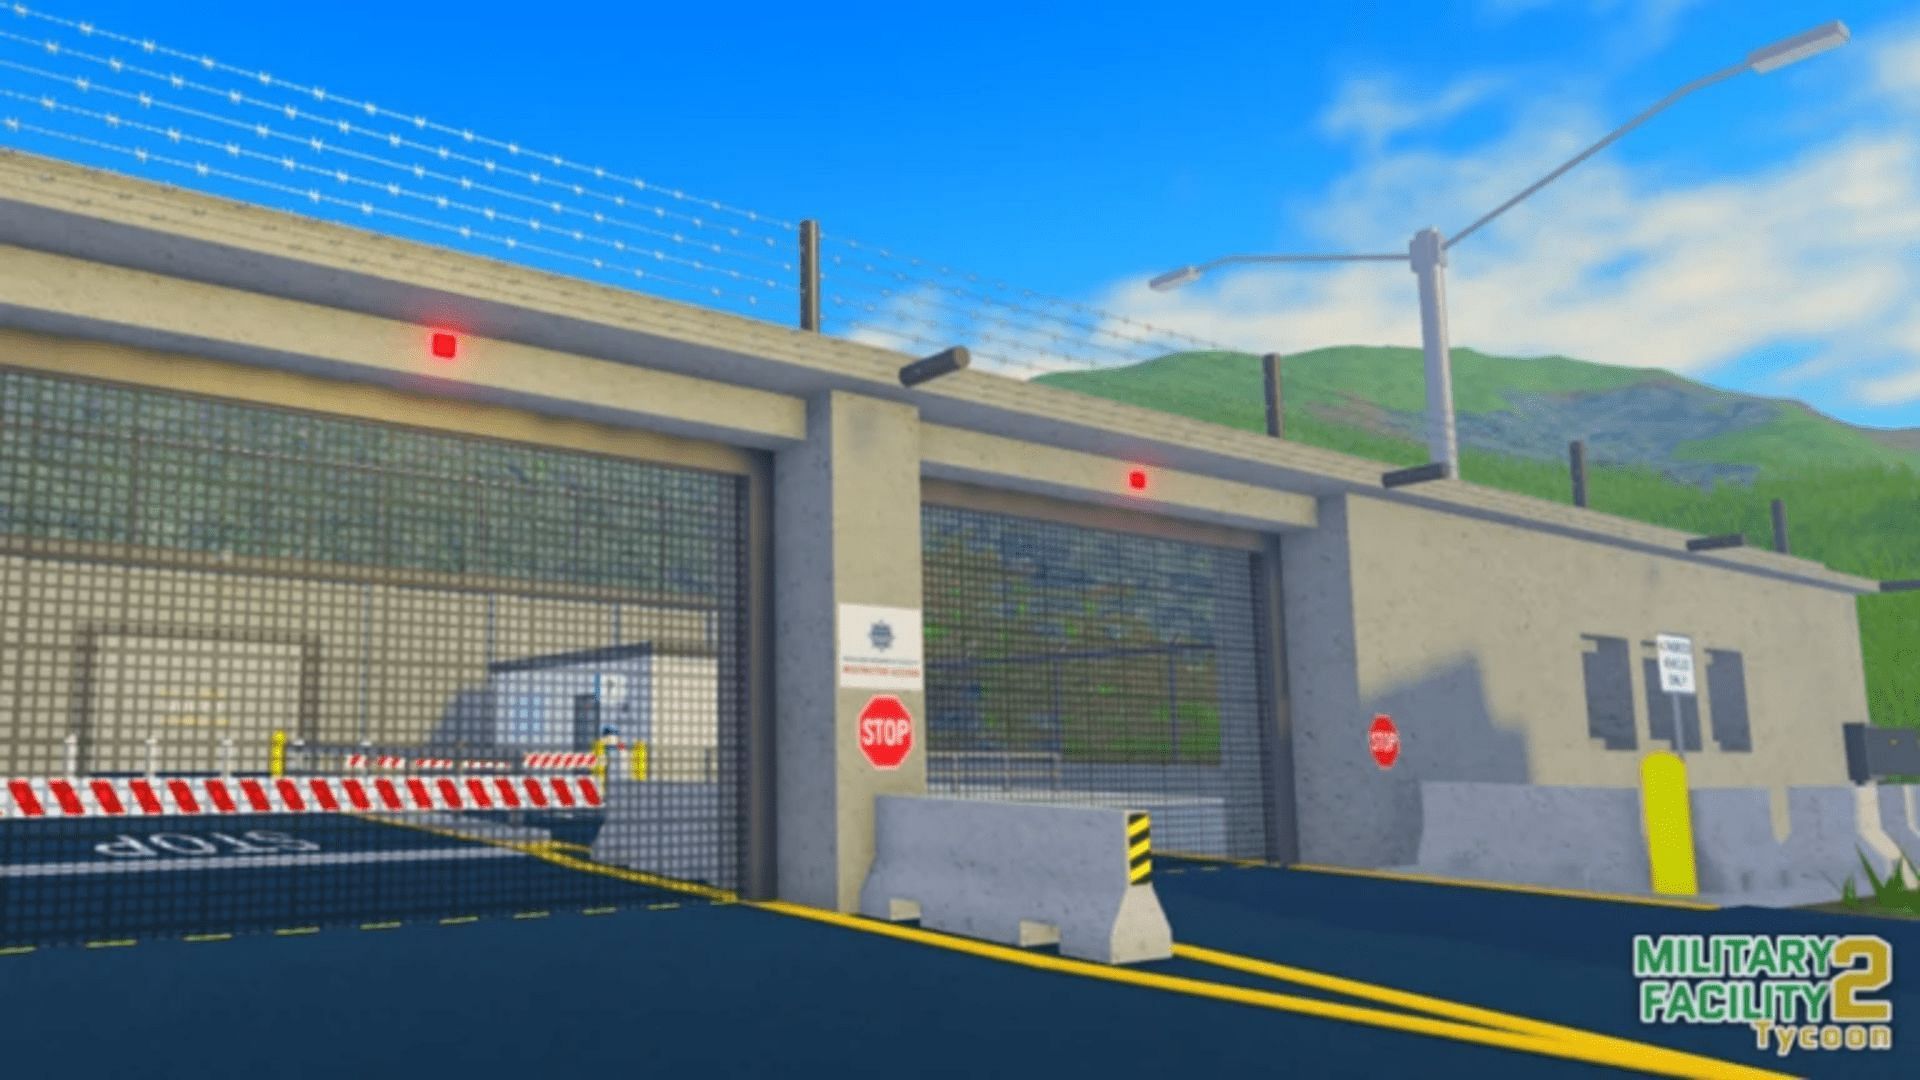 Inactive codes for Military Facility Tycoon 2 (Image via Roblox)